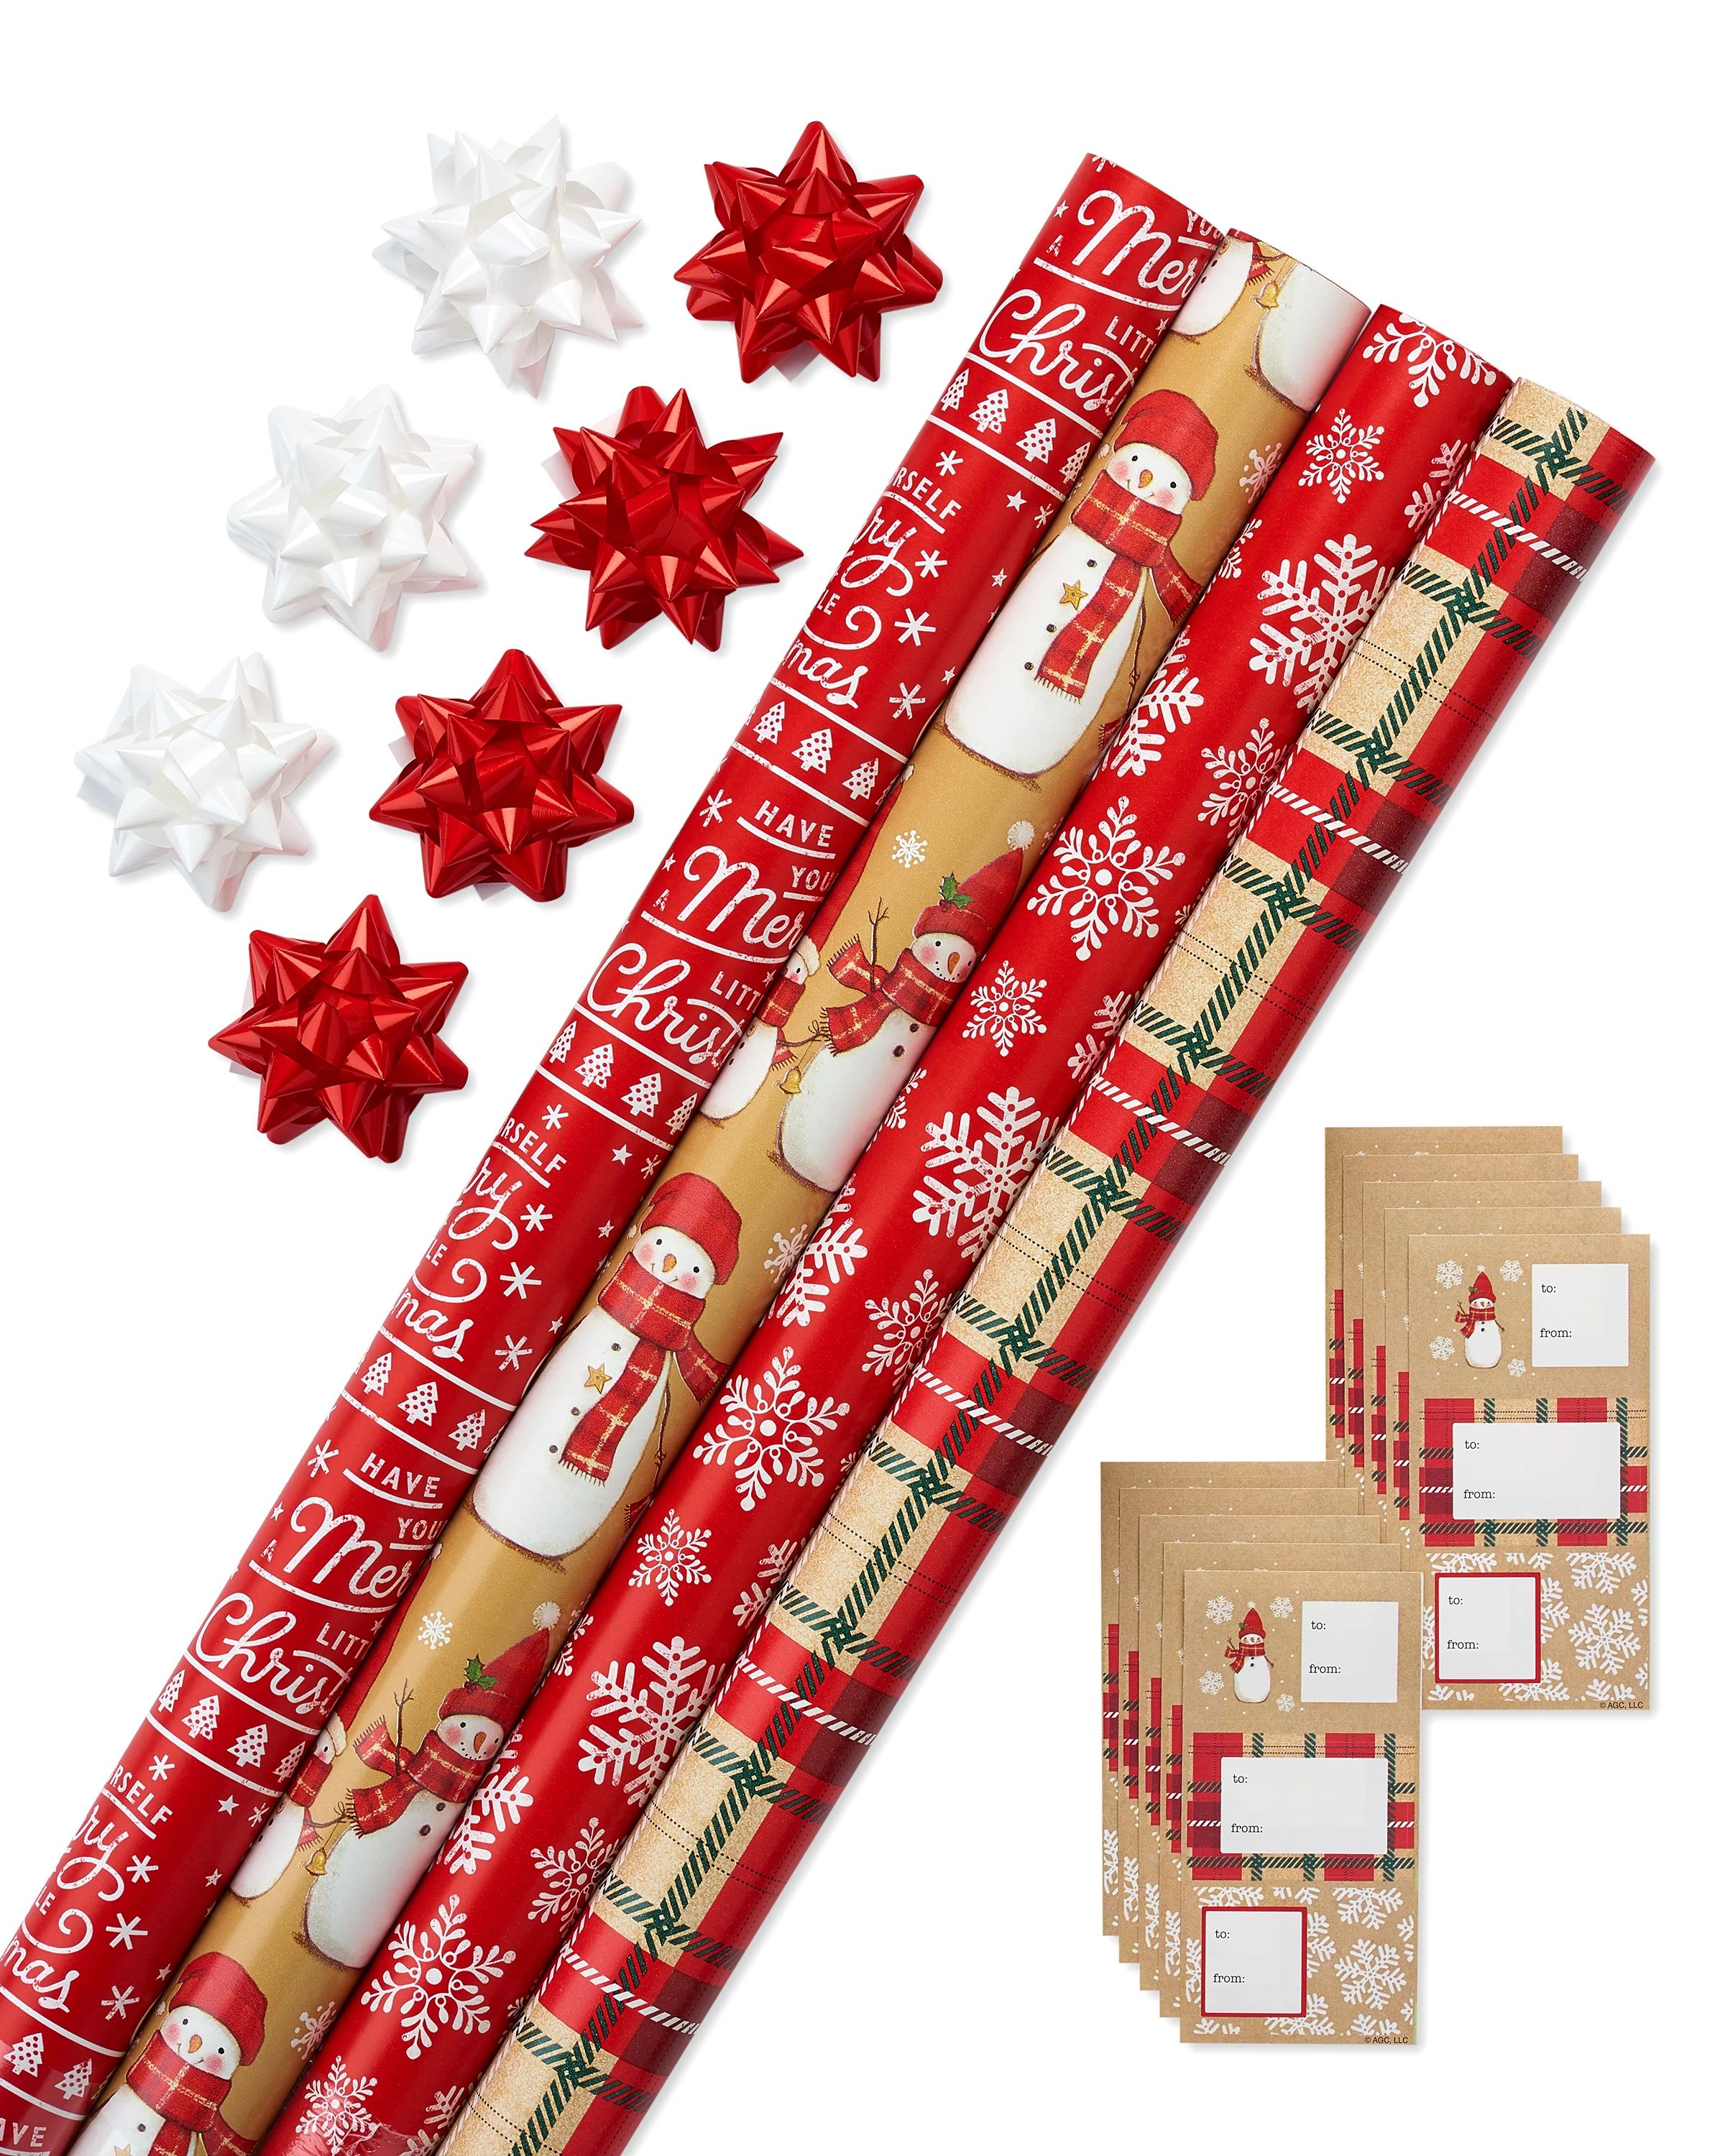 American Greetings Christmas Wrapping Paper Ensemble with Gift Tags, Red, Green and Tan, Snowmen,... | Walmart (US)